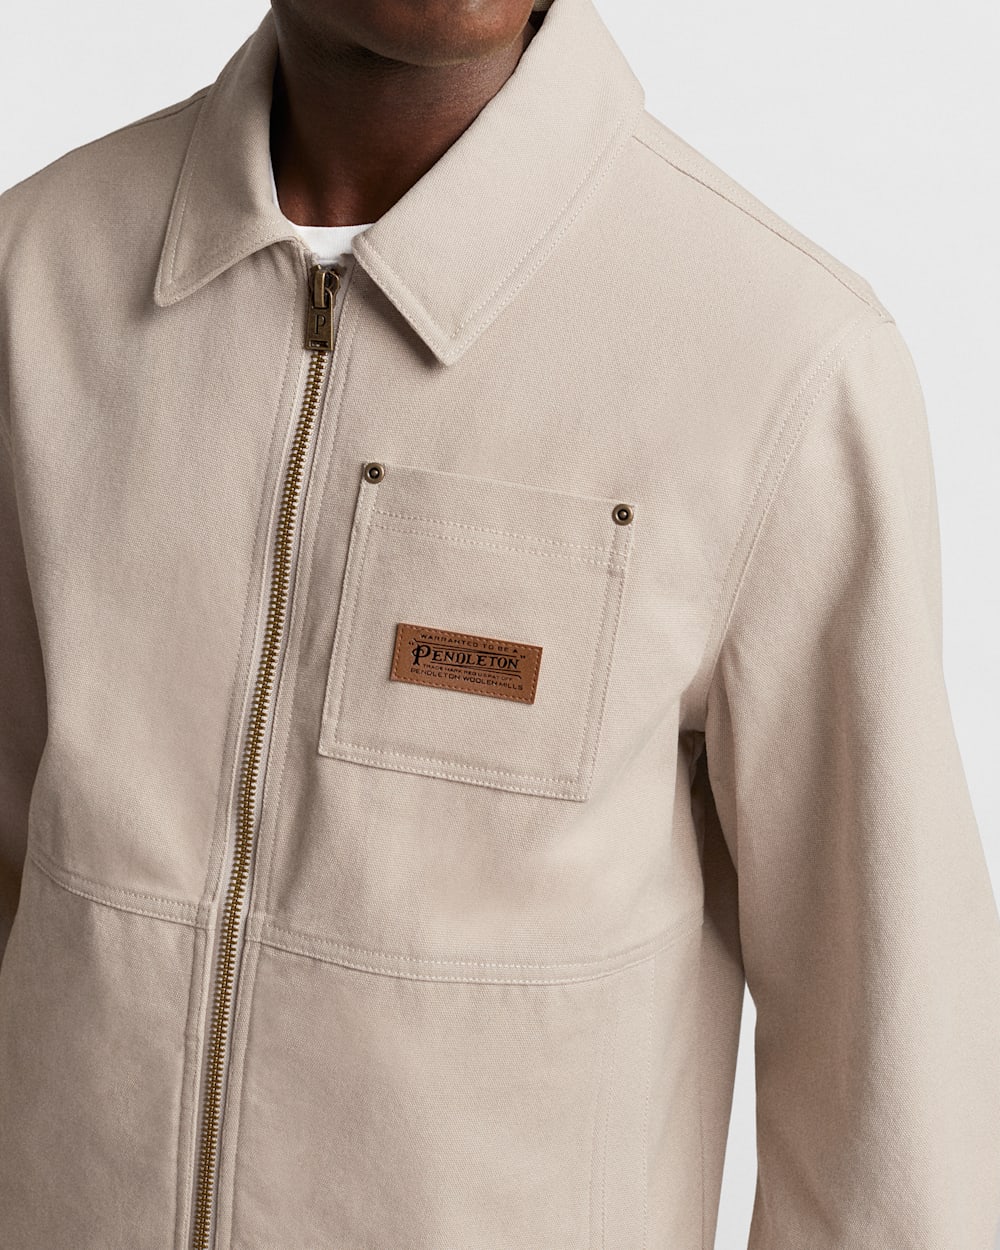 ALTERNATE VIEW OF MEN'S ADAMS CANVAS MECHANIC'S JACKET IN TAUPE image number 4